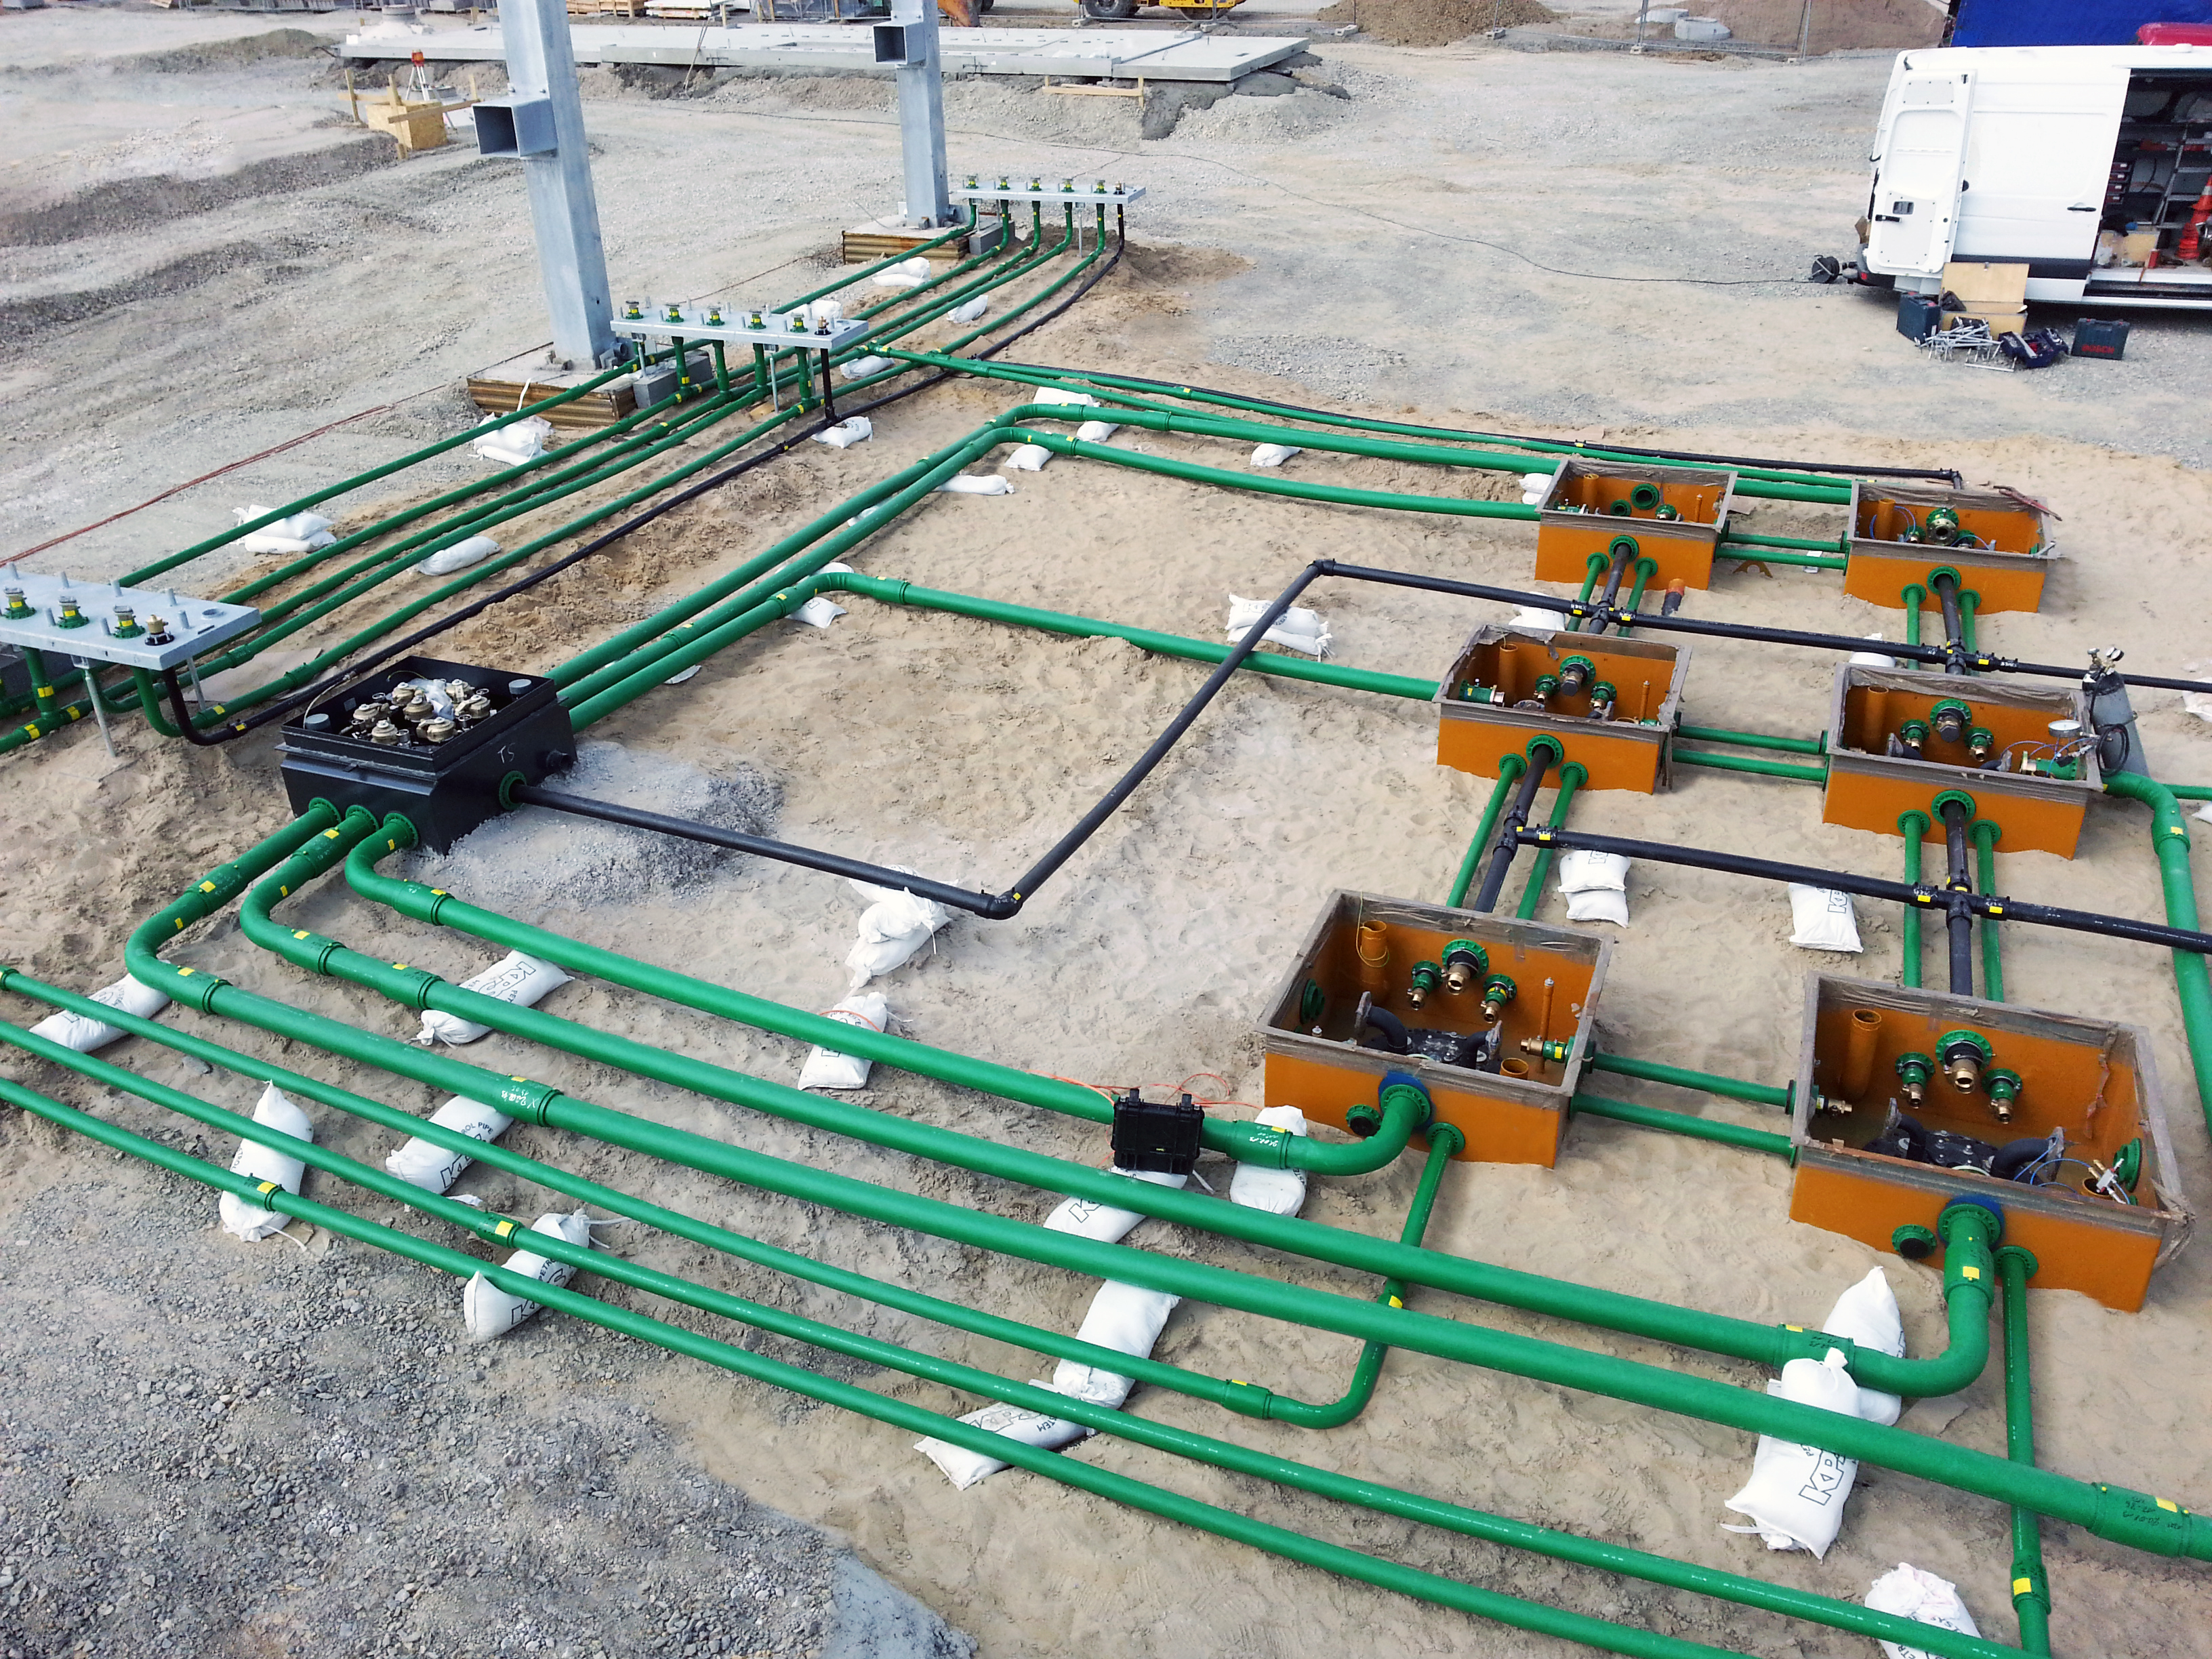 KPS piping had to be installed within 5 working days to meet the strict project deadline